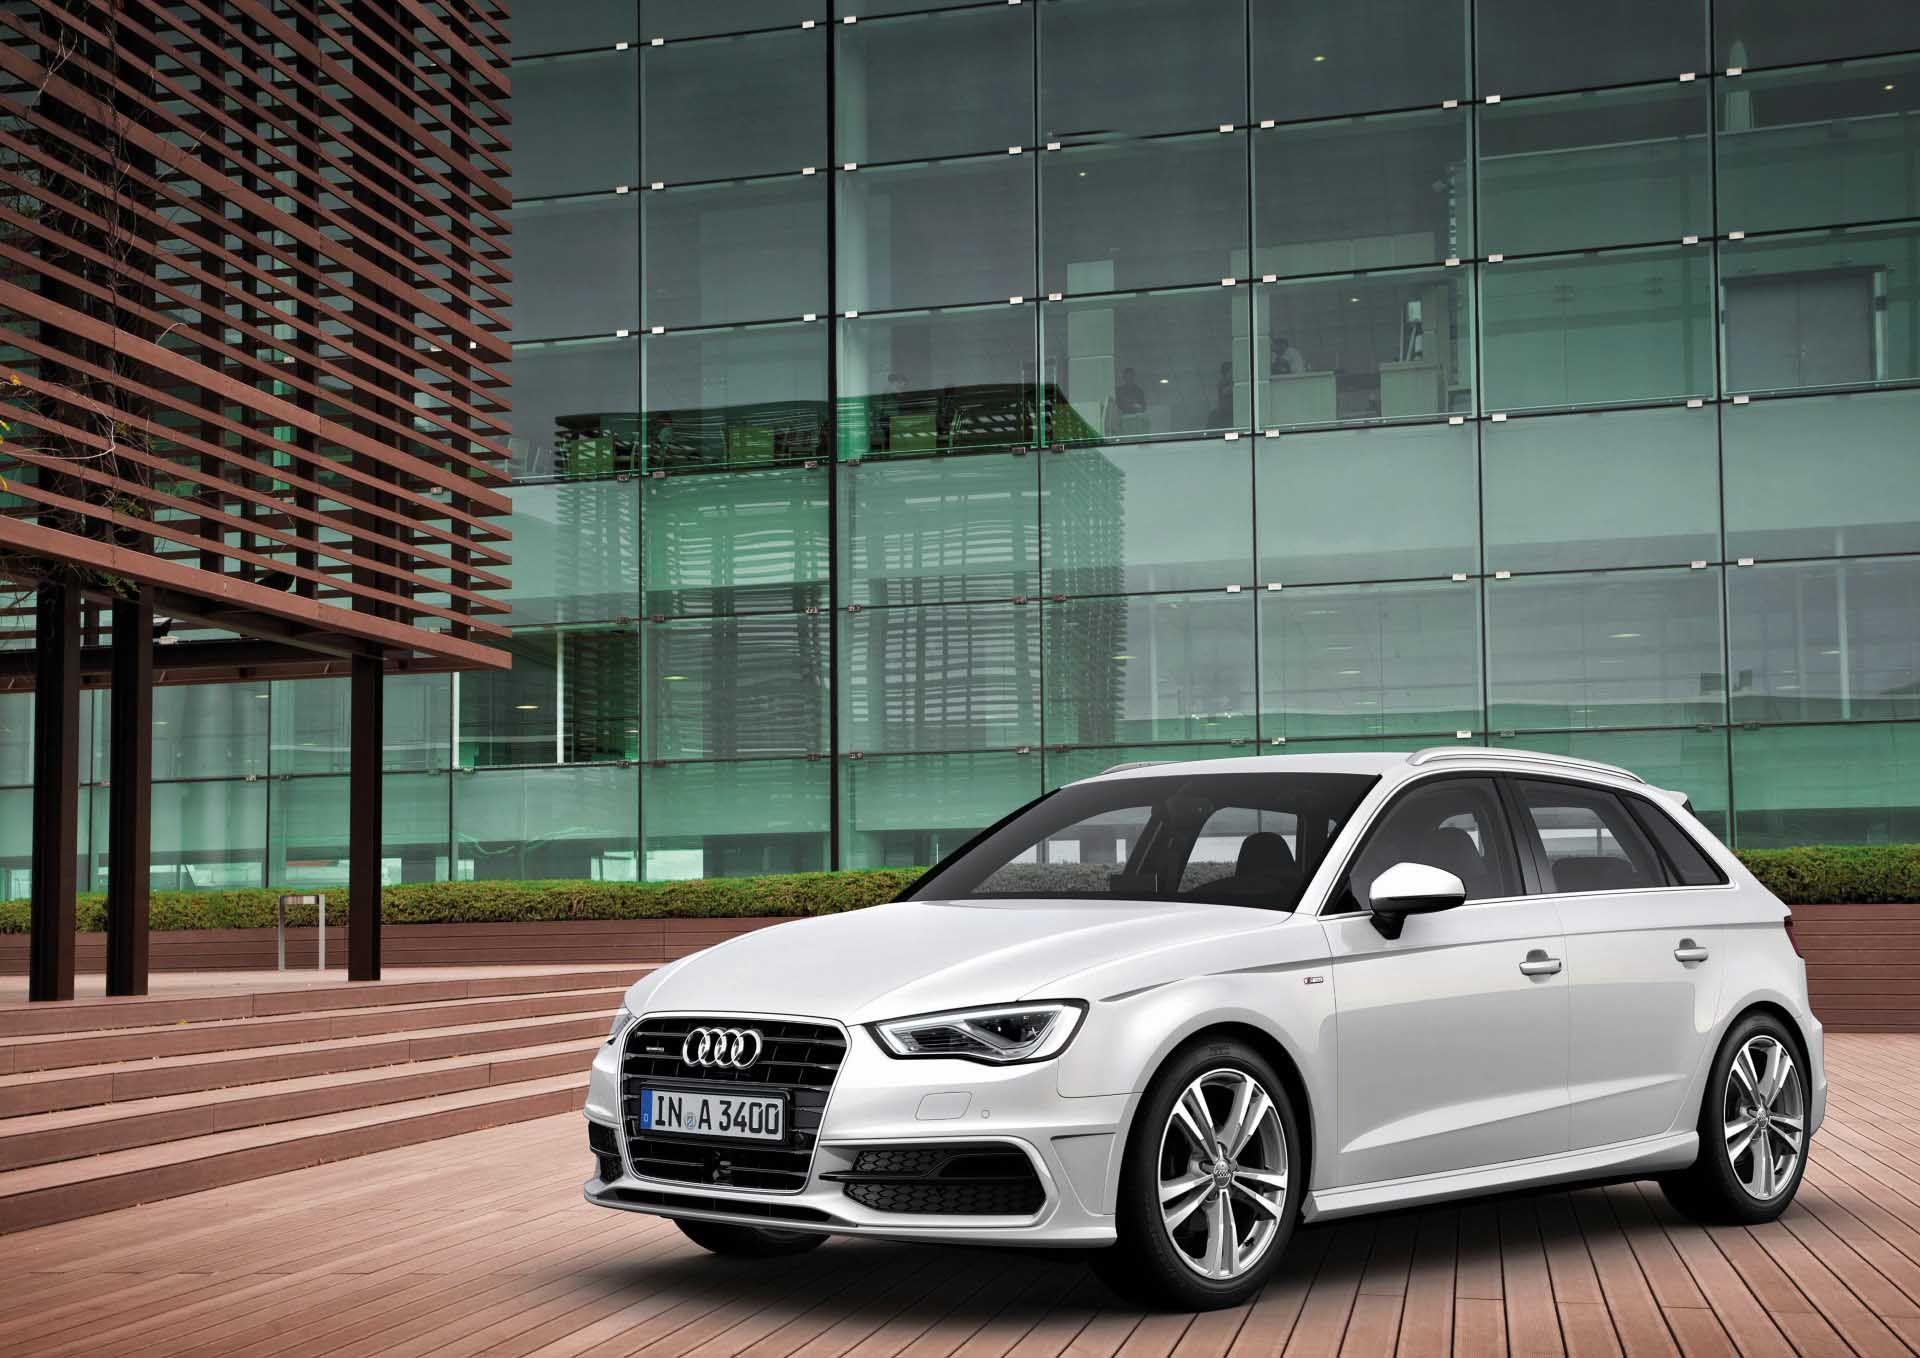 Awesome Audi A3 Sportback Review Full HD Wallpaper